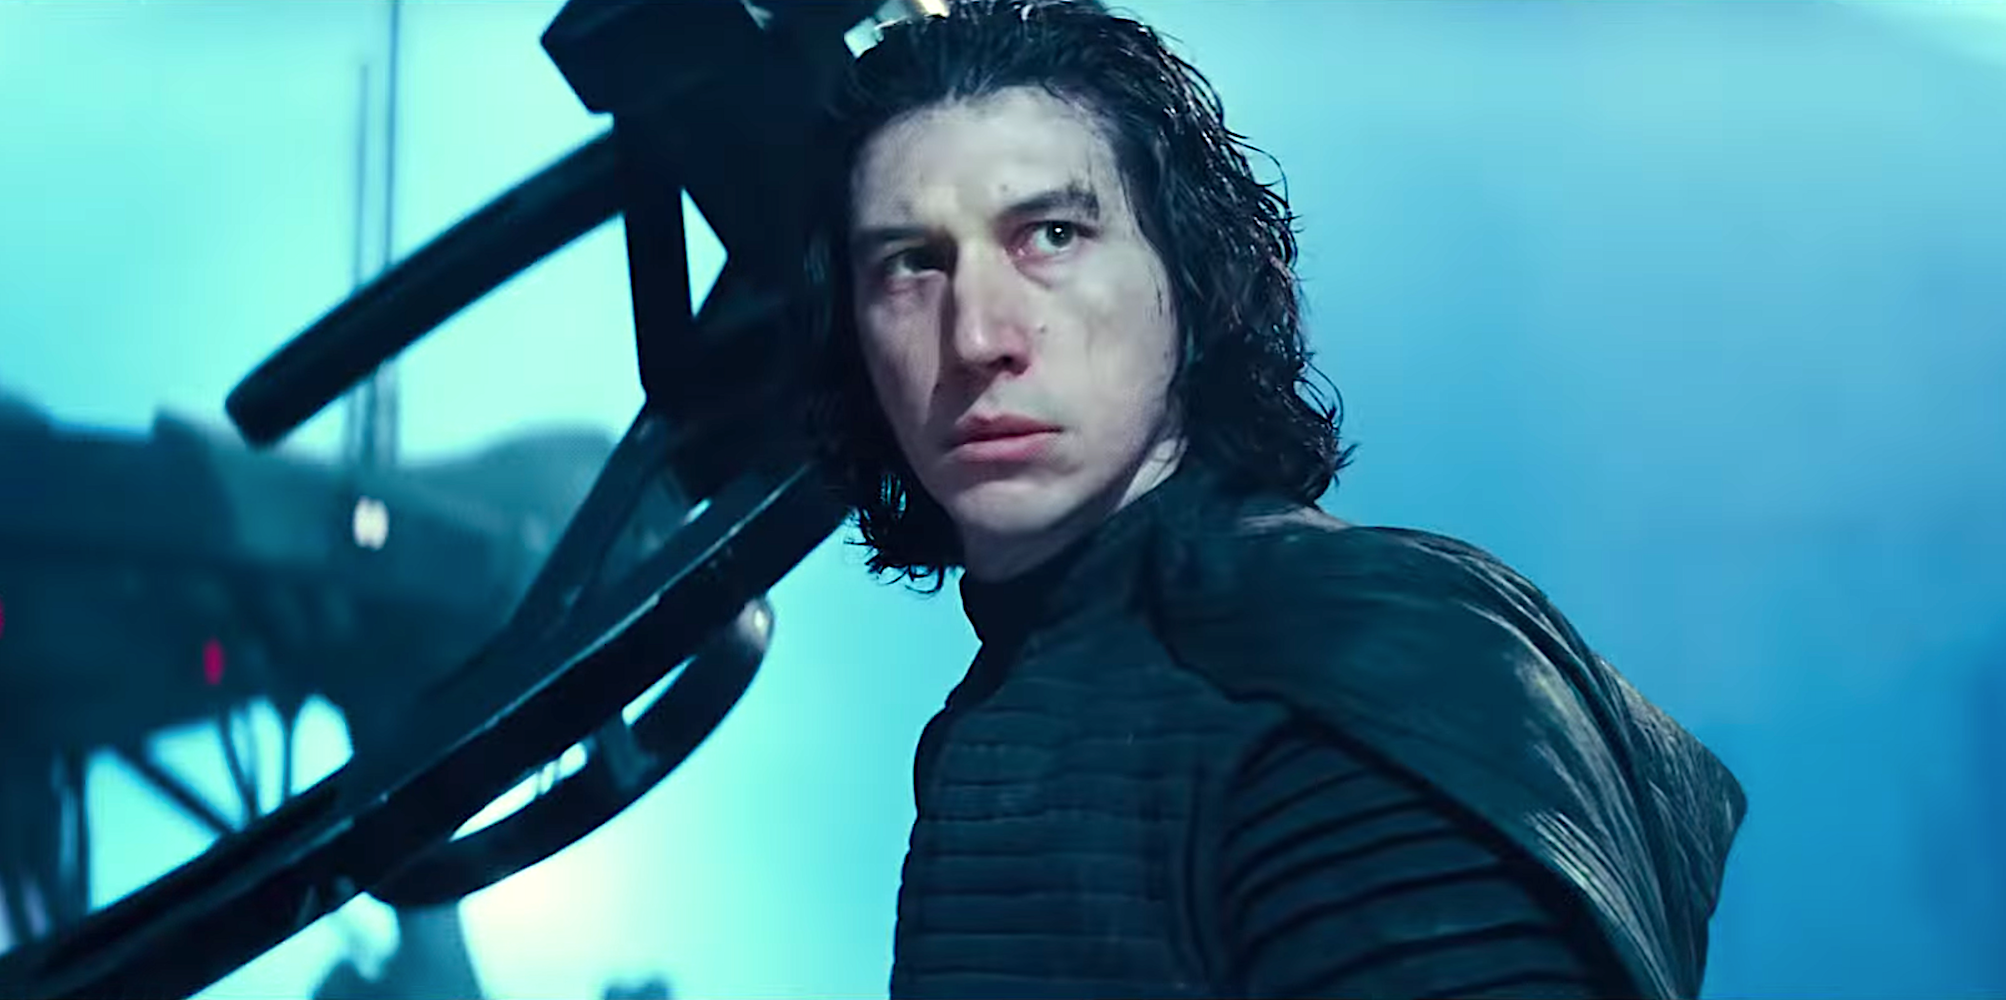 'Star Wars' Fans Noticed a Detail in the New 'Rise of Skywalker' Trailer That Supports a Major Kylo Ren Theory